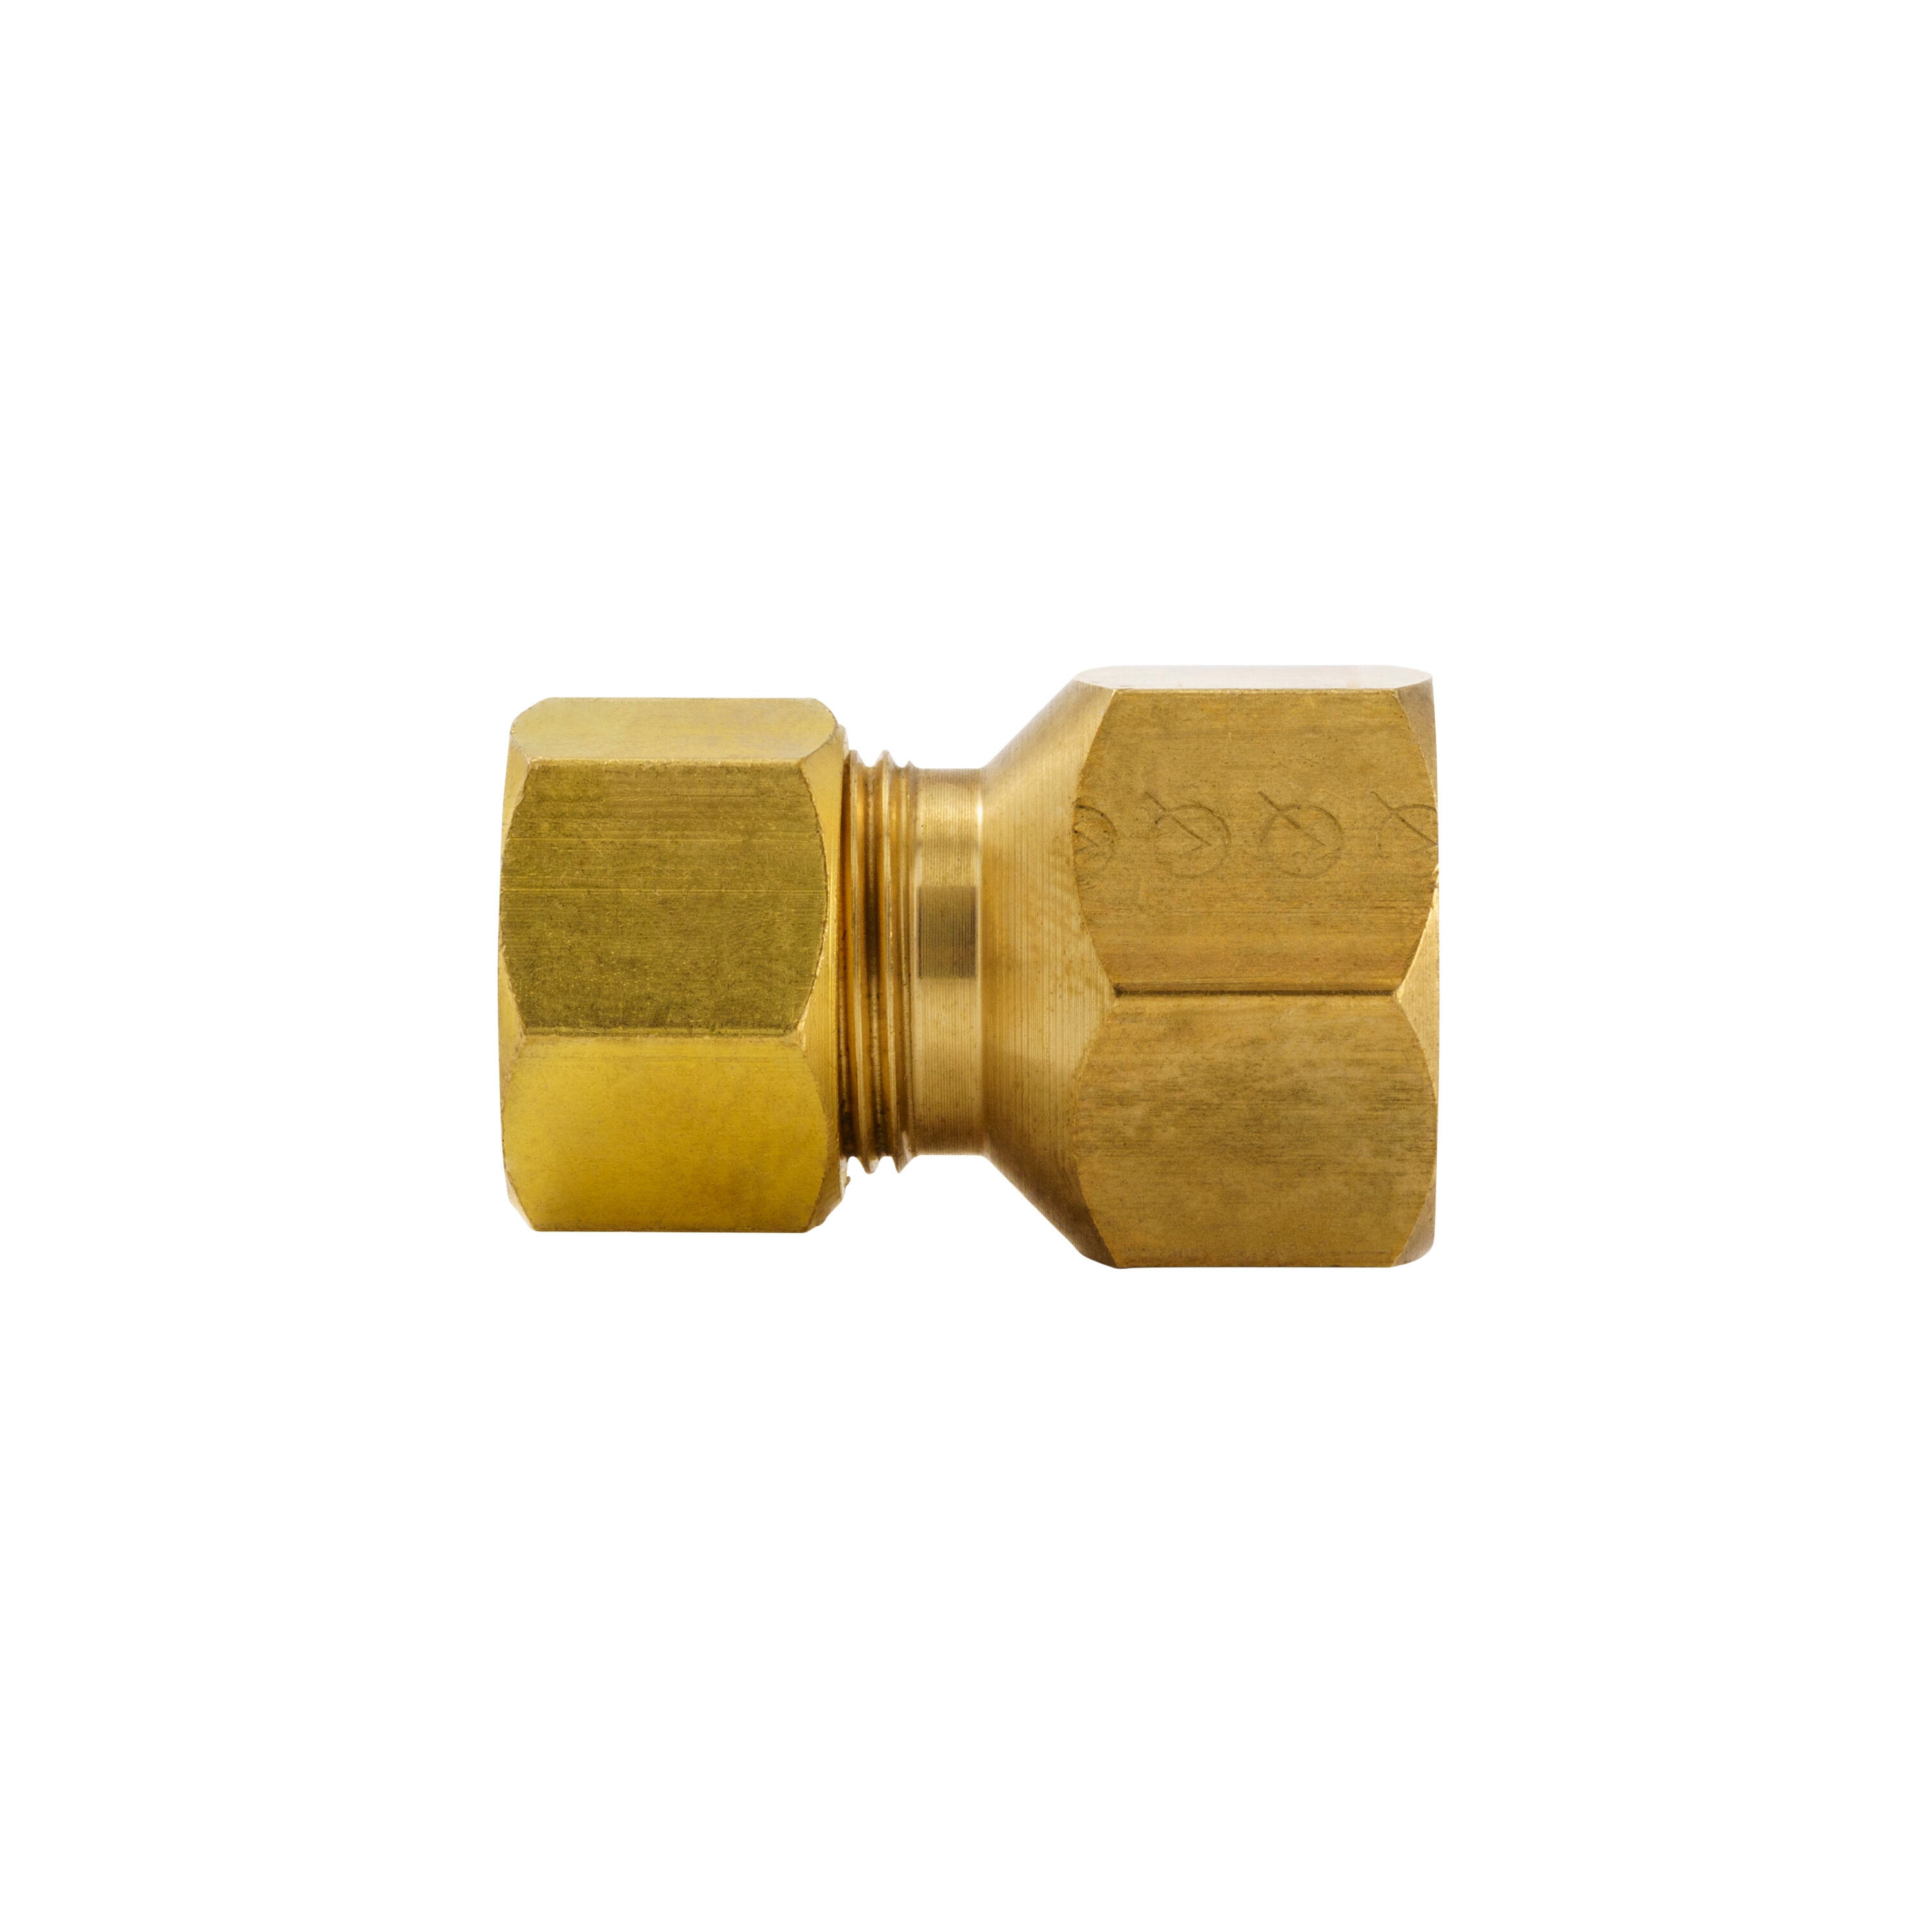 Brass compression fittings ø 25 mm for PE pipe: Coupling sleeve 207